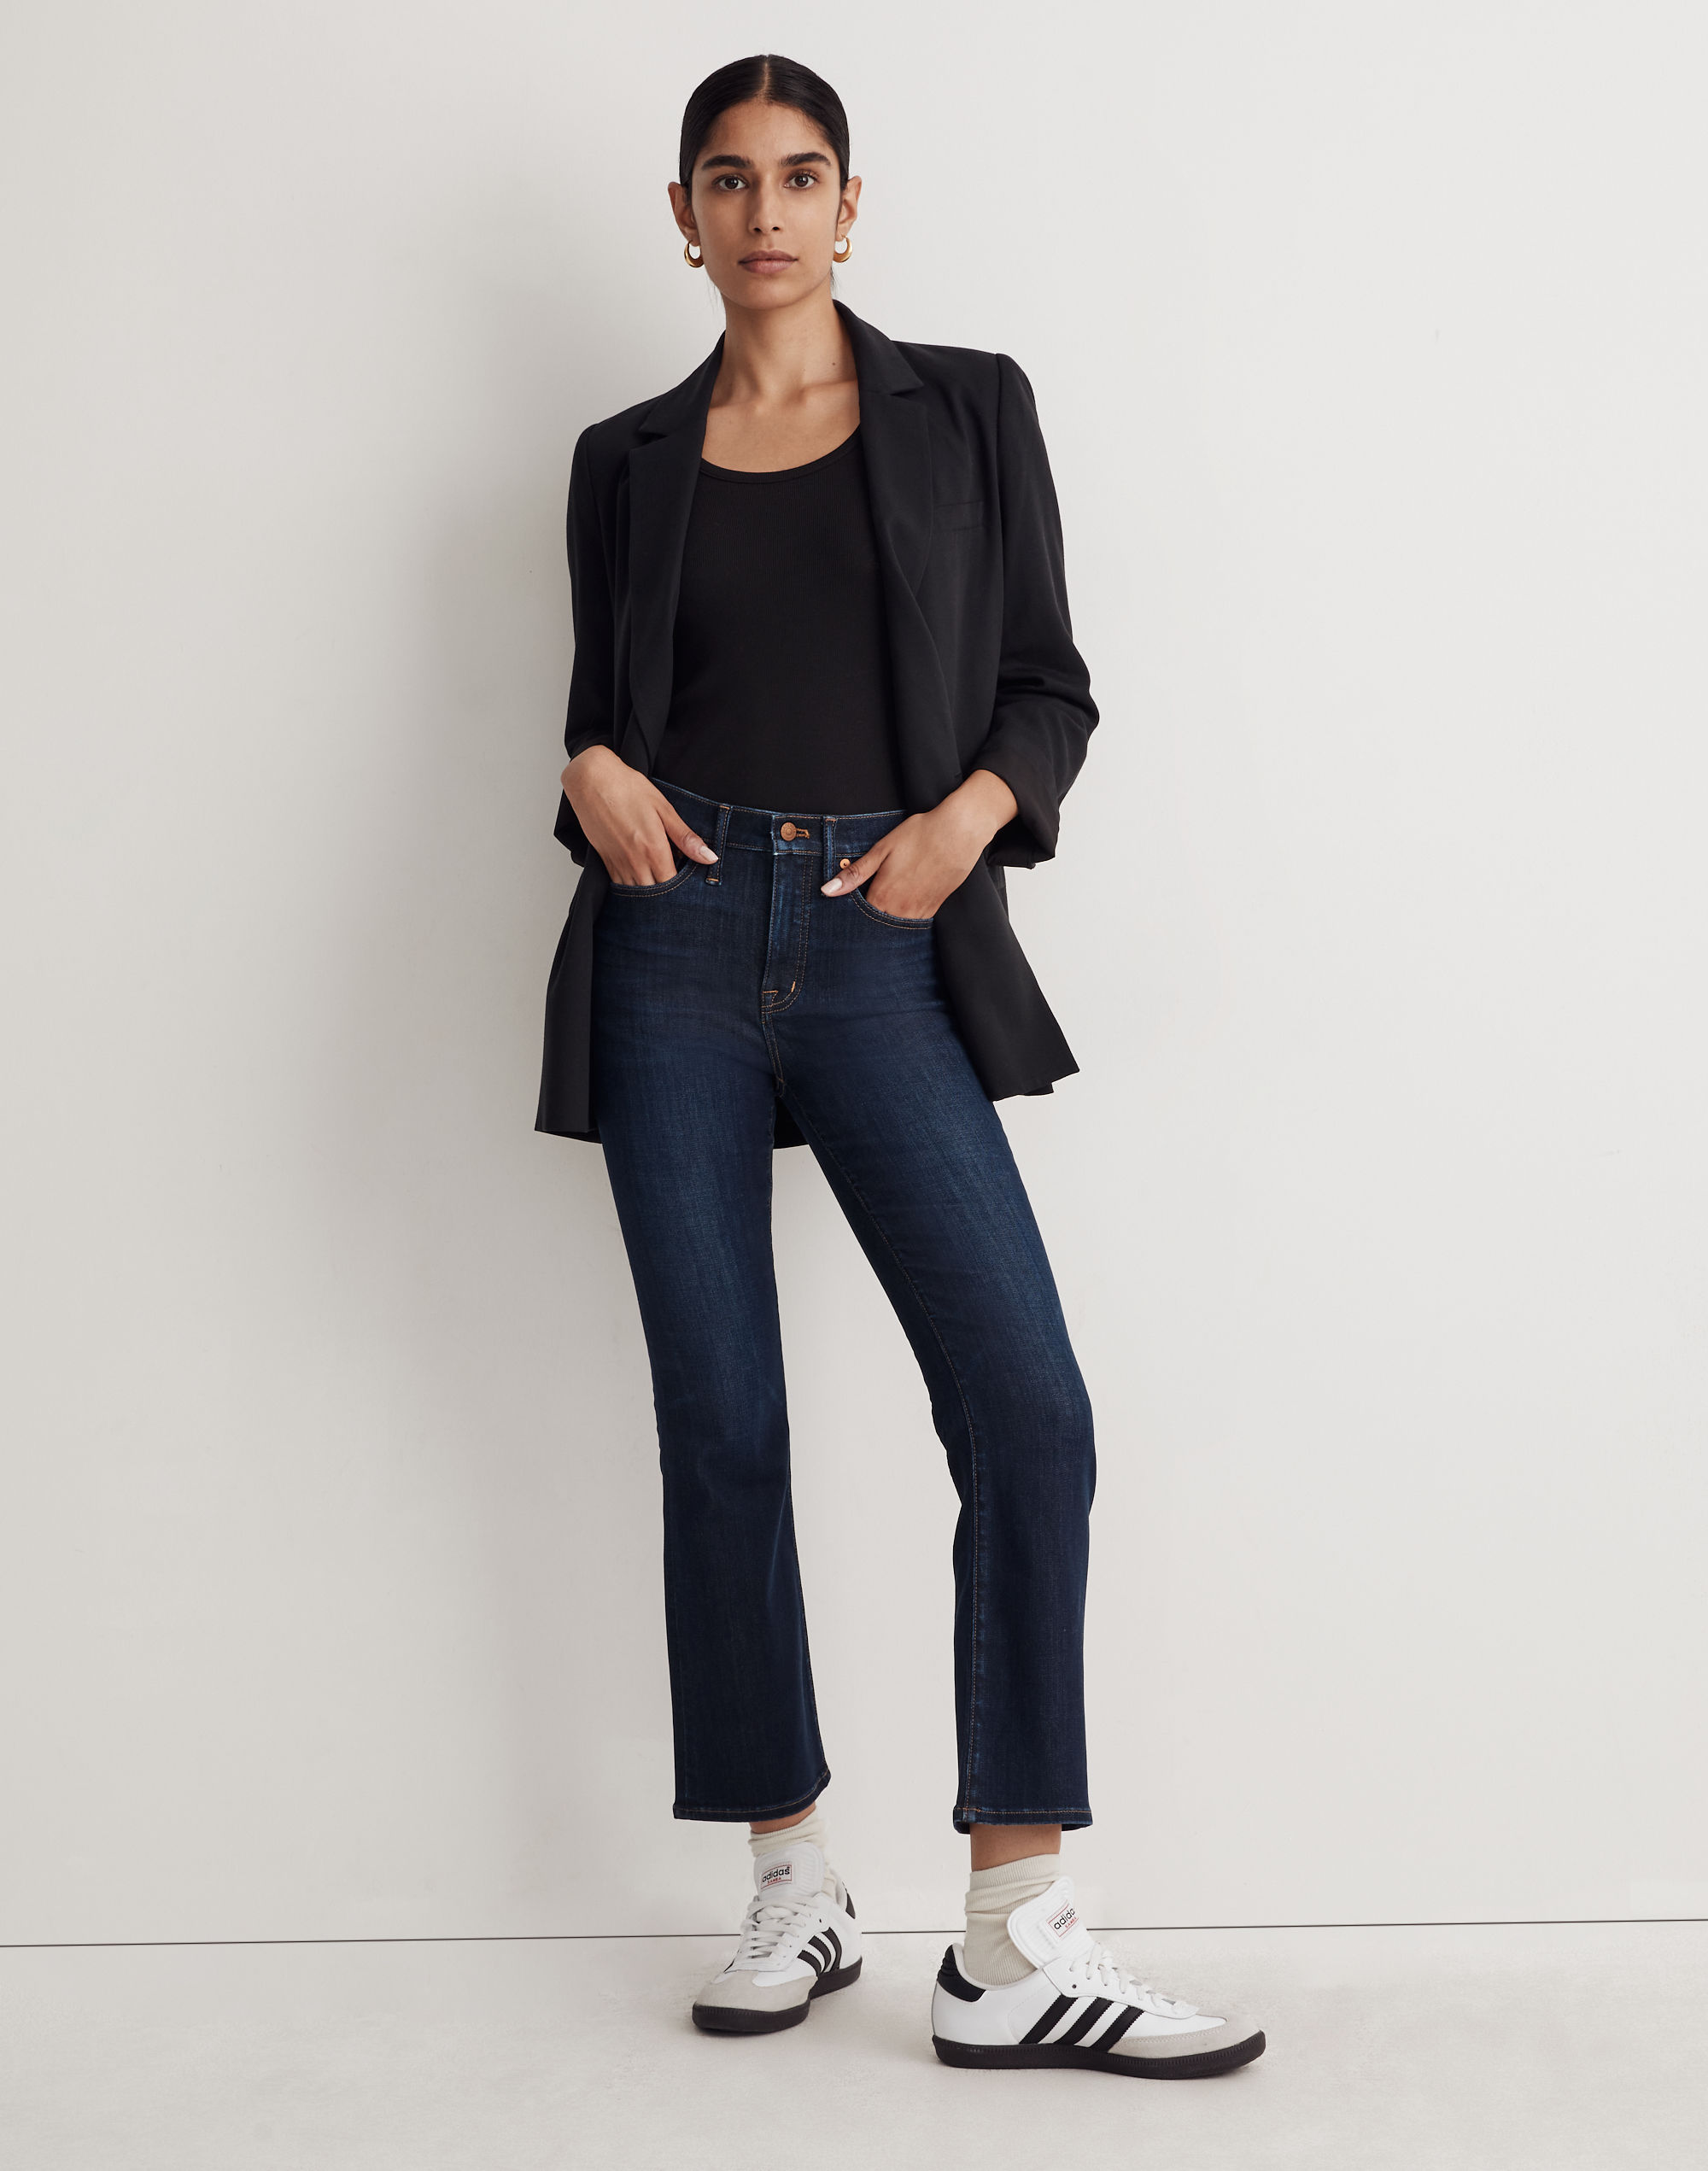 Women's Perfect Vintage Jean in Ainsworth Wash | Madewell